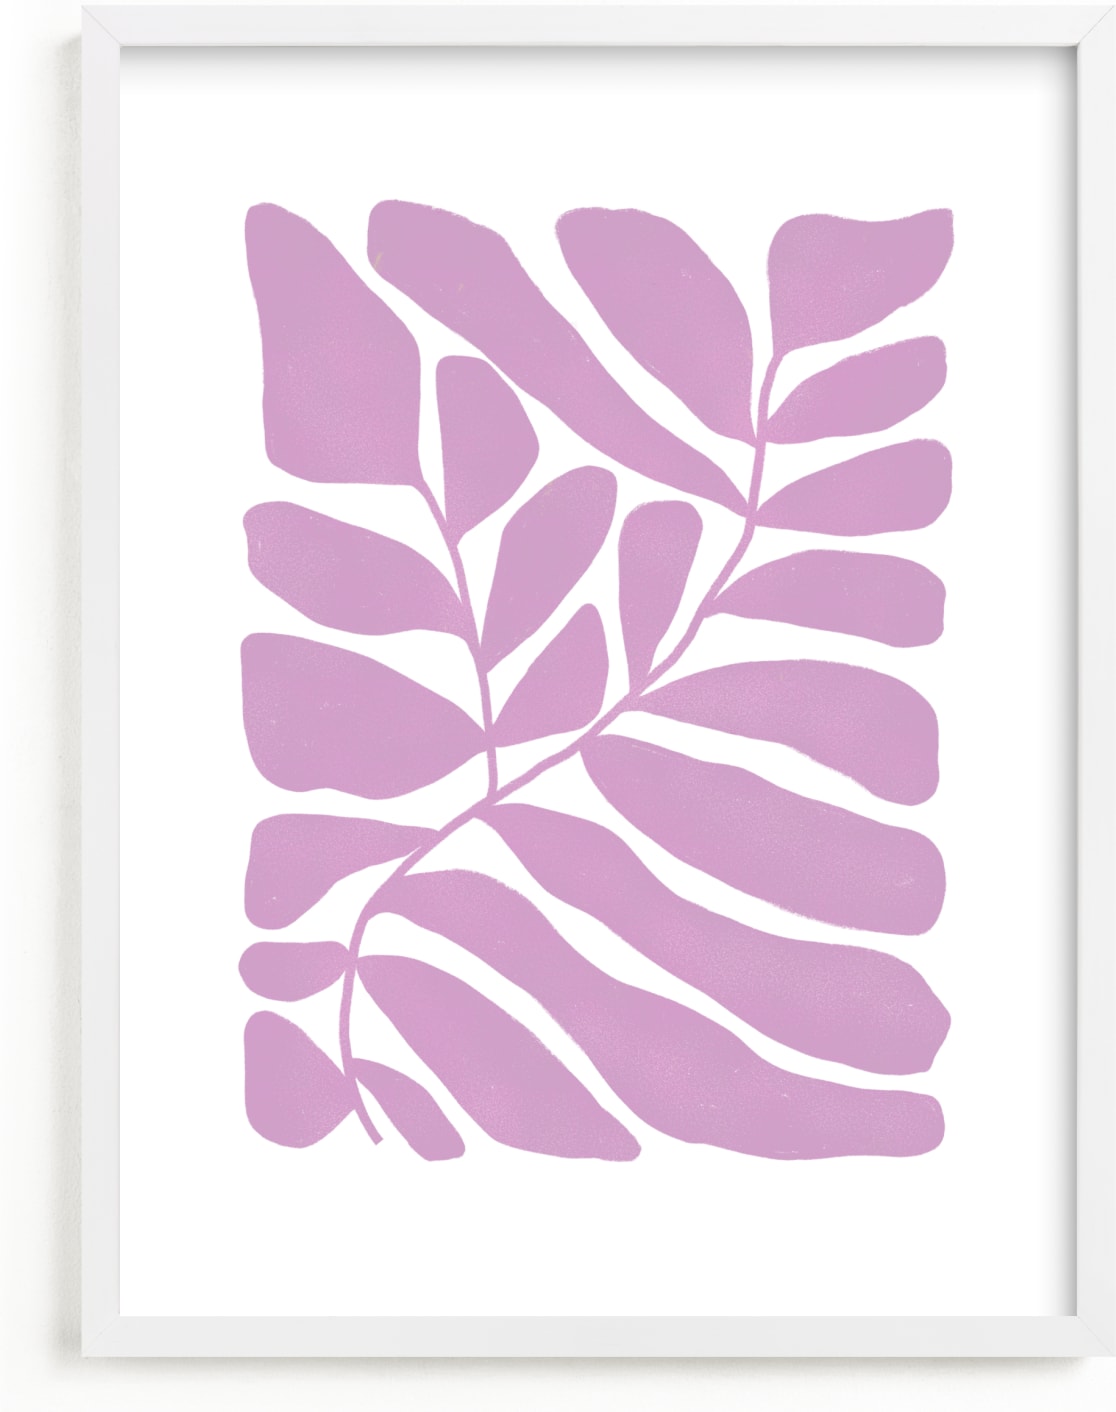 This is a purple art by Kelly Ambrose called Loopy Leaves I.